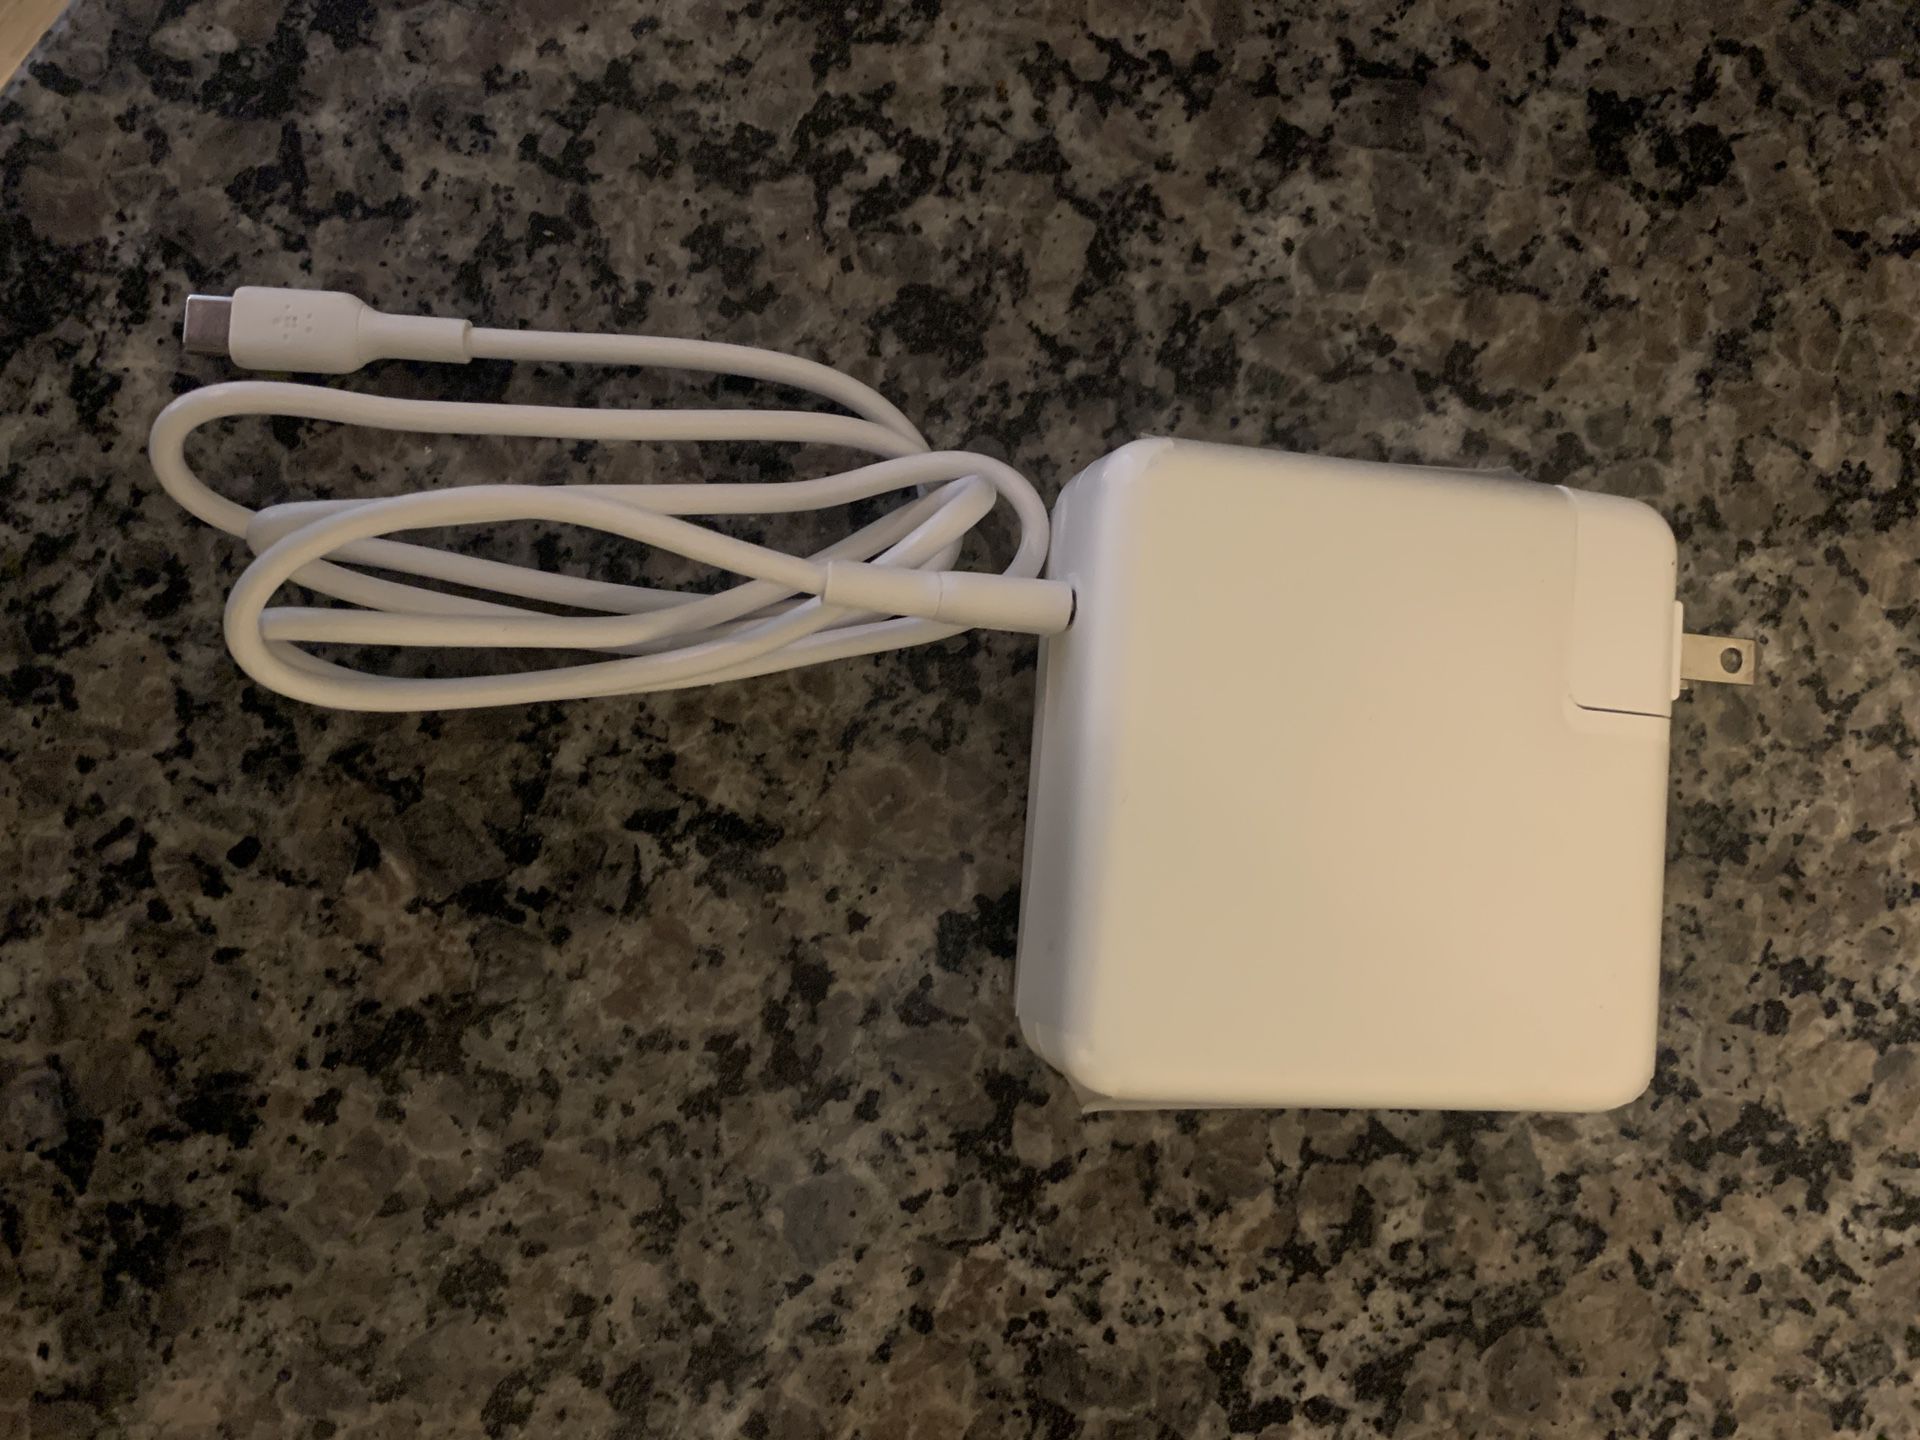 MacBook Pro Charger Brand New.